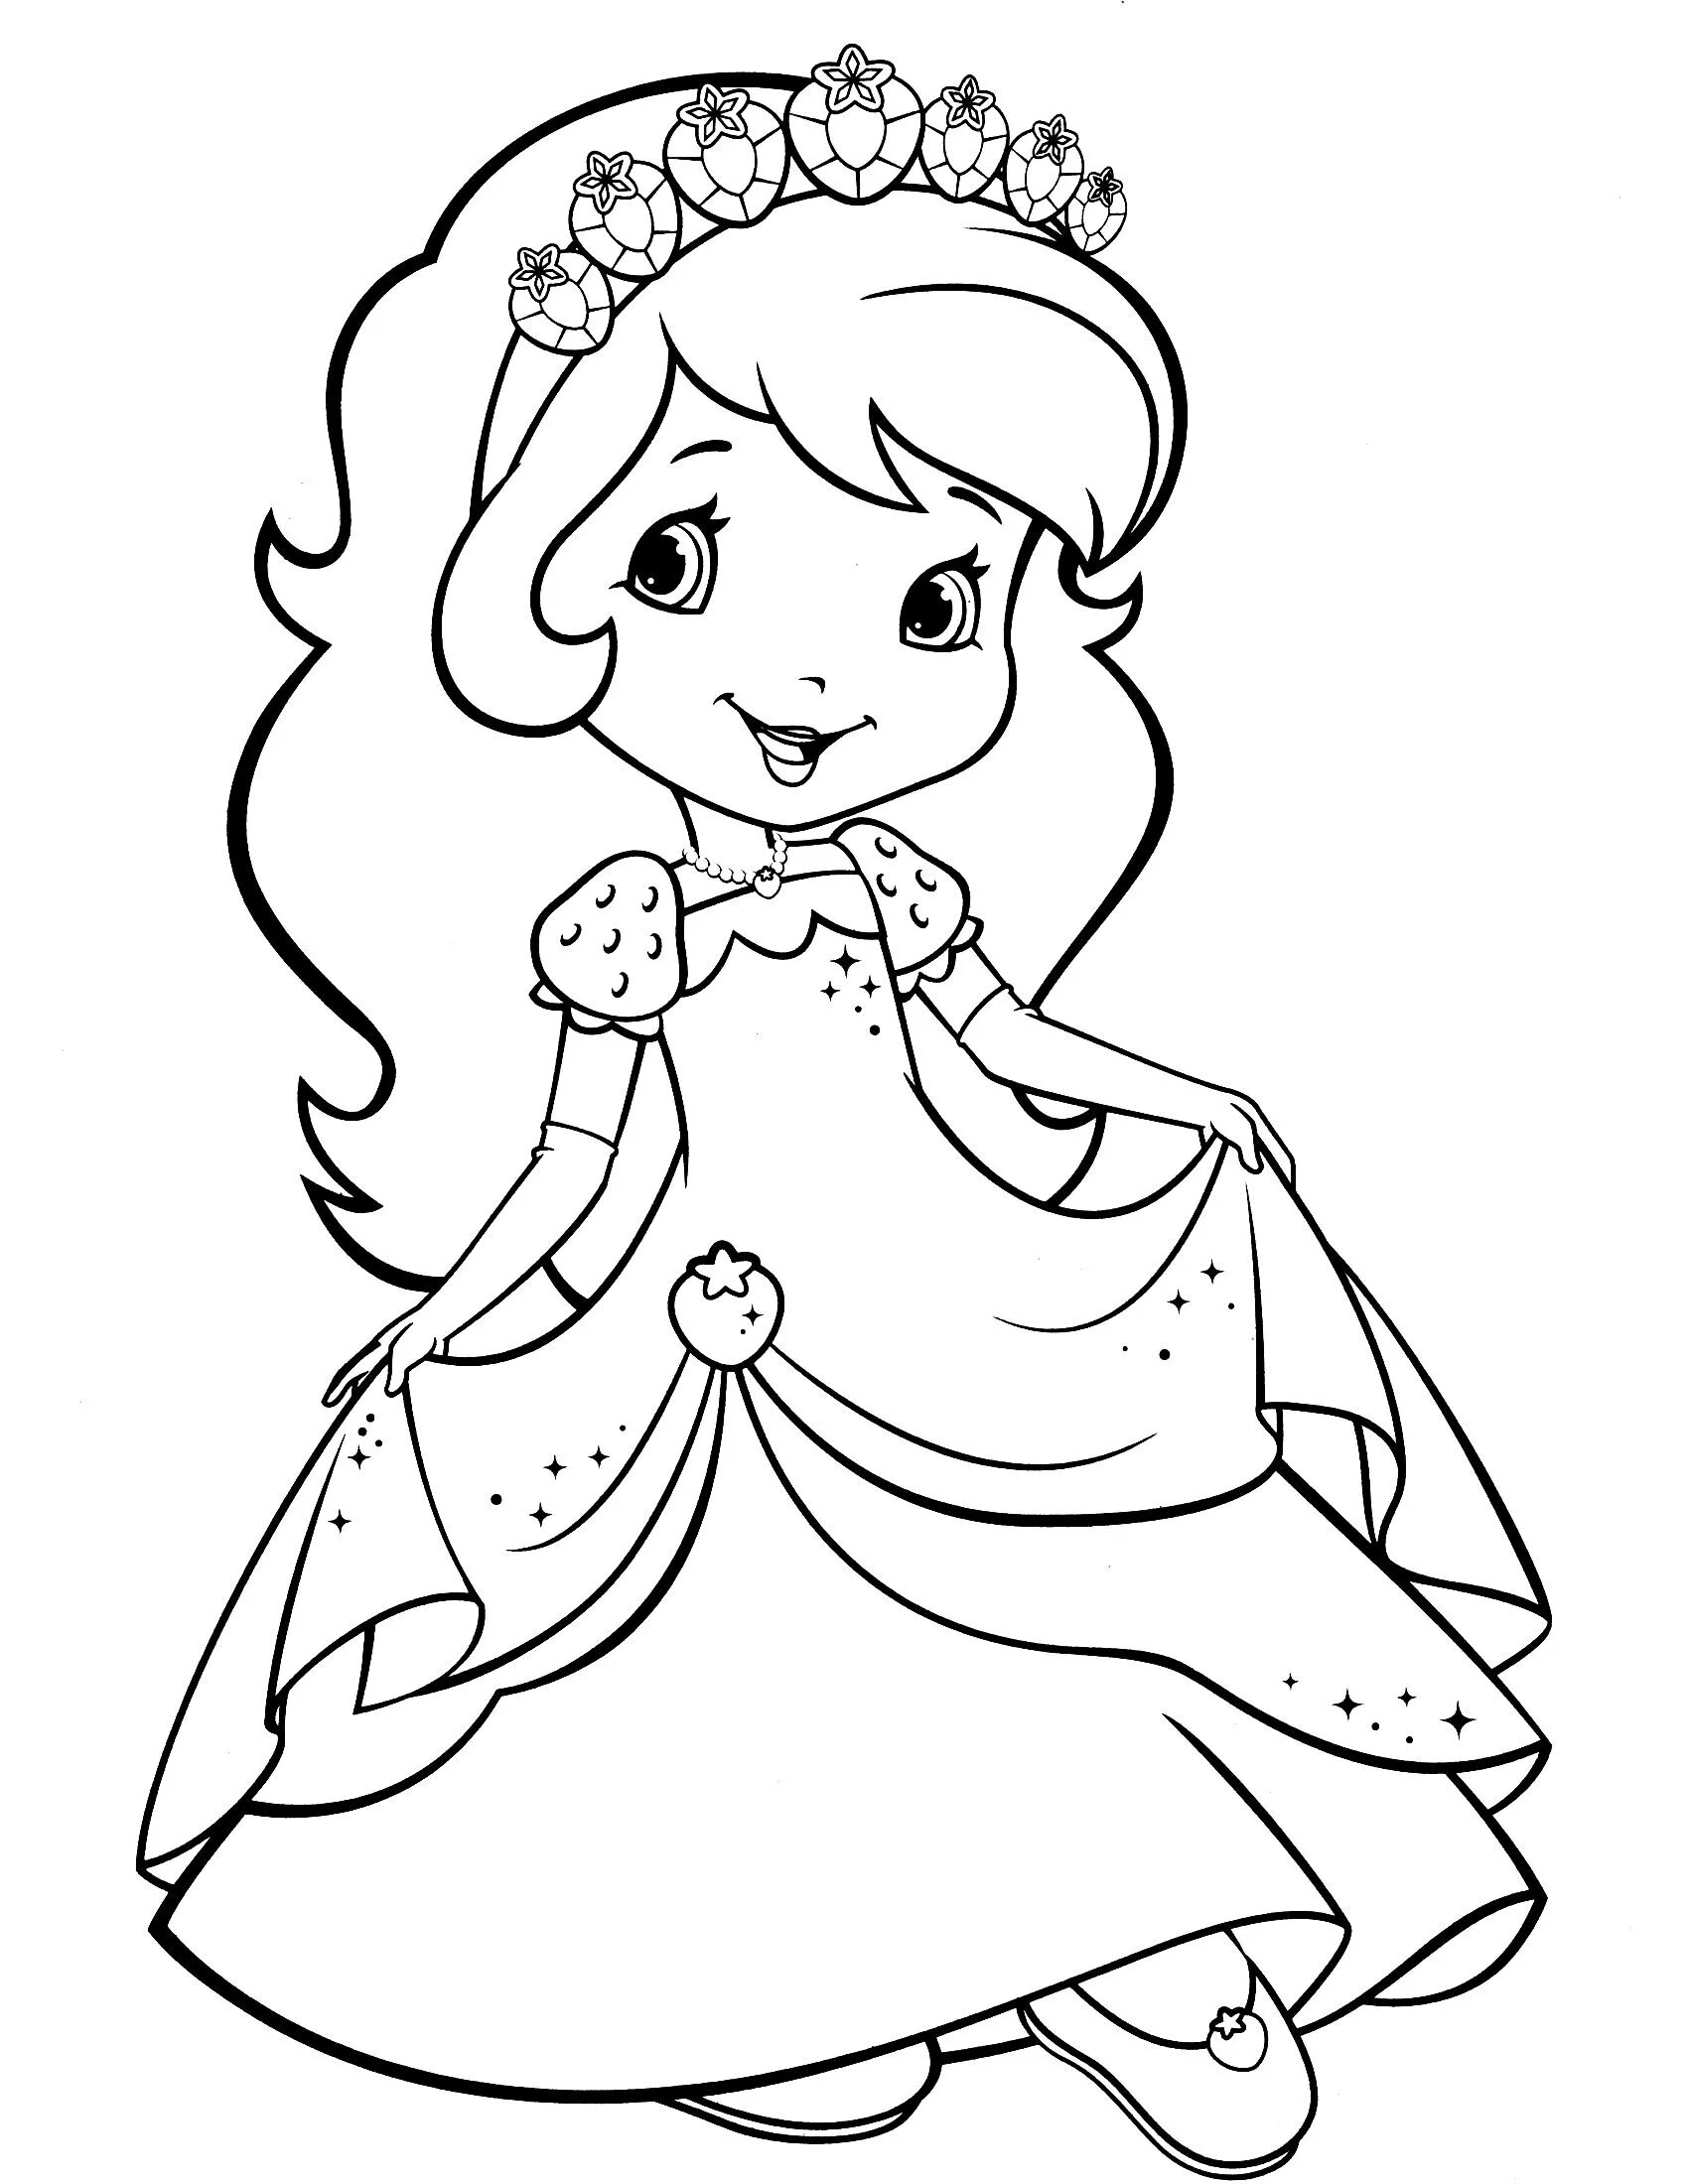 Irresistible coloring of children's princesses